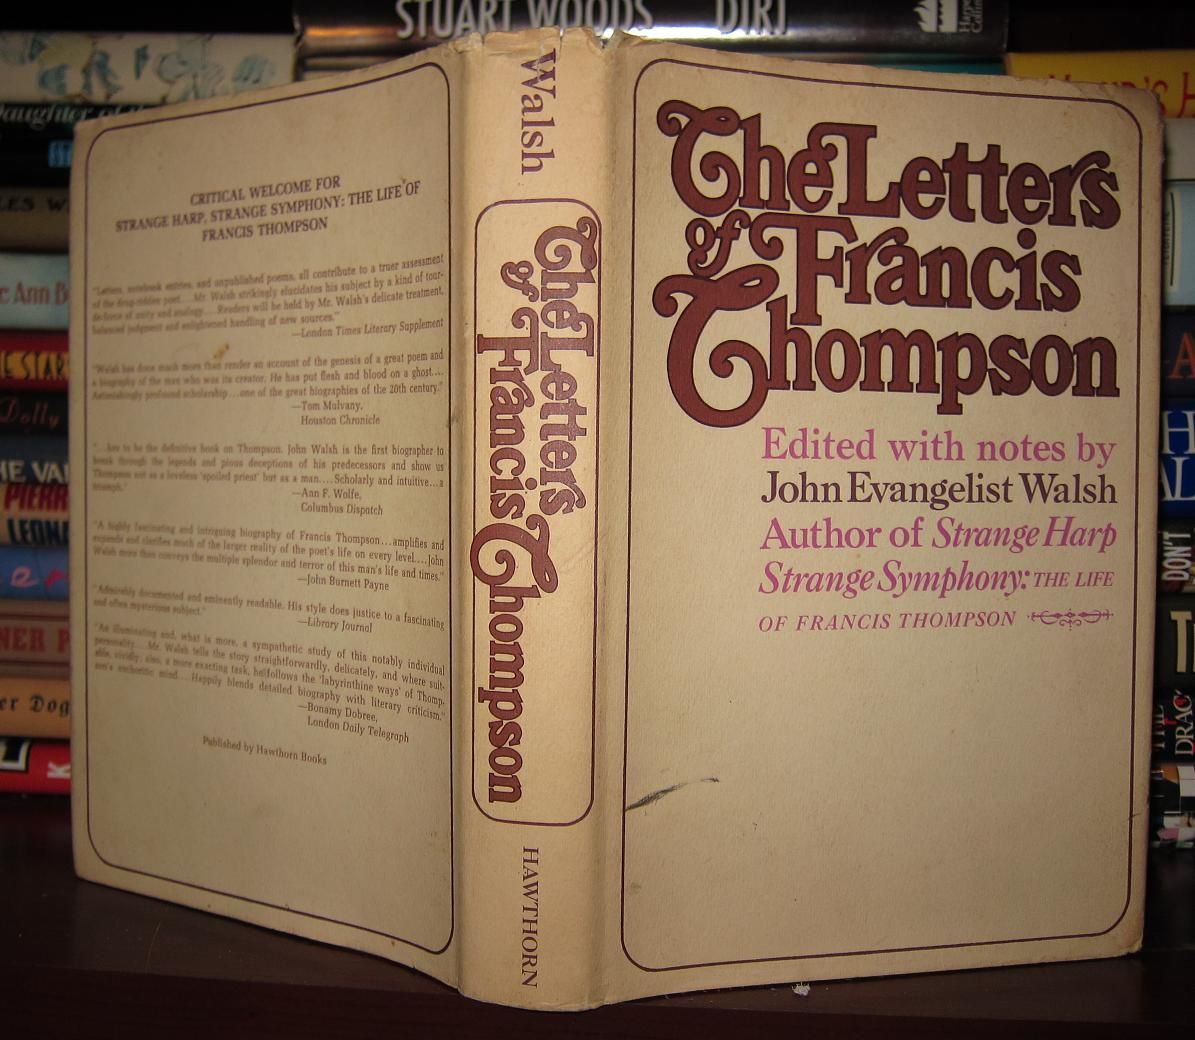 FRANCIS THOMPSON, JOHN EVANGELIST WALSH - The Letters of Francis Thompson